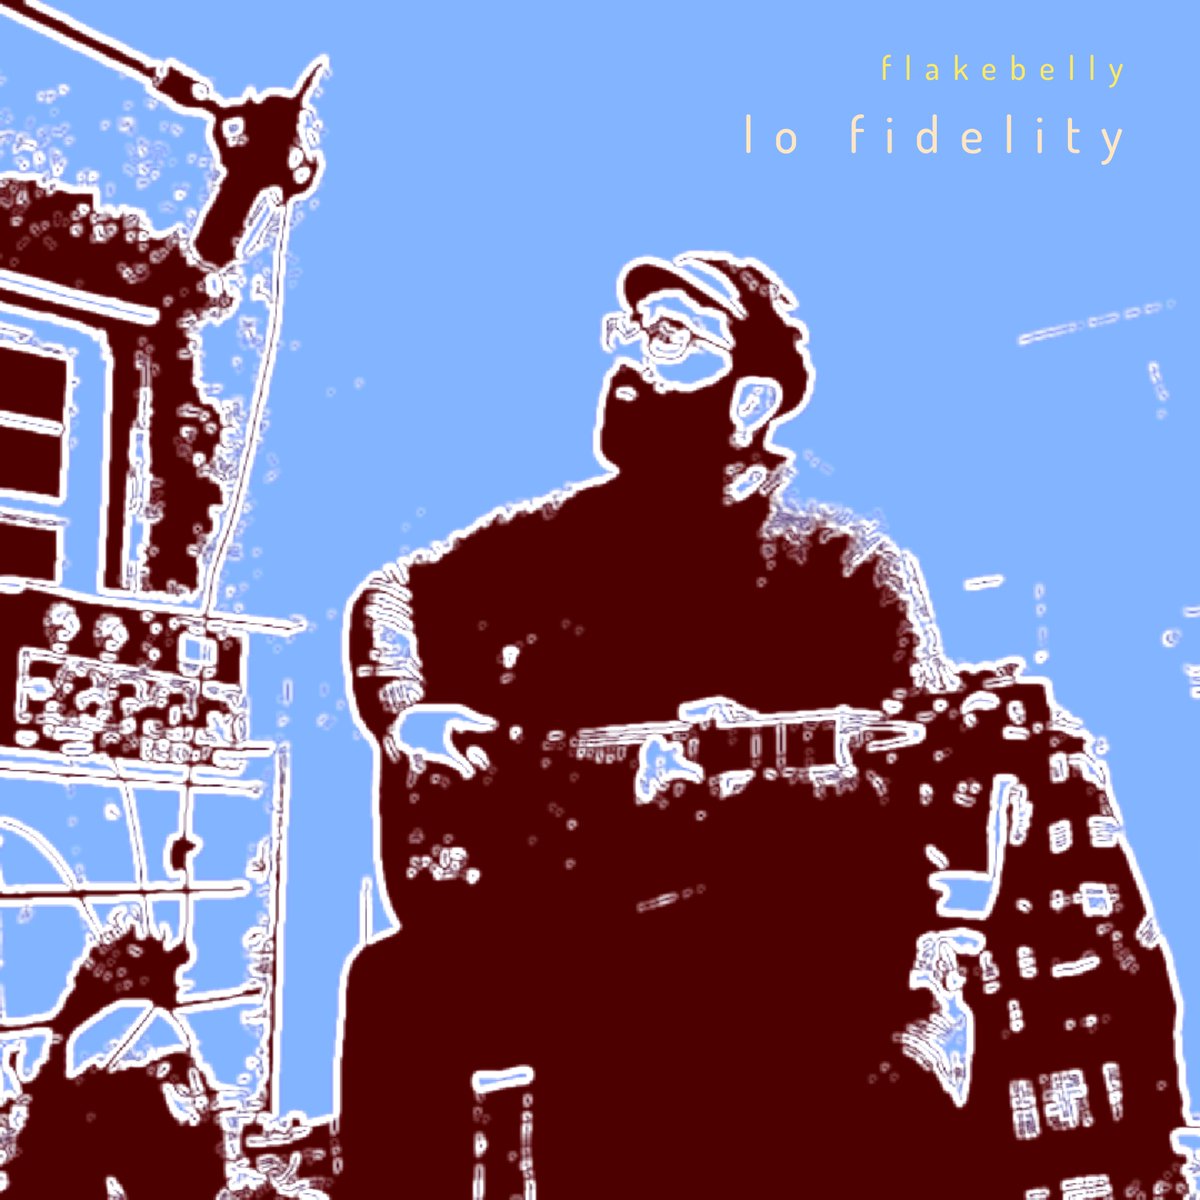 It's music, Jim and probably quite like other music you've heard before. Lo Fidelity EP - out NOW! Link in bio #music #indiemusic #acoustic #indiefolk #folk #alternativemusic #singersongwriter